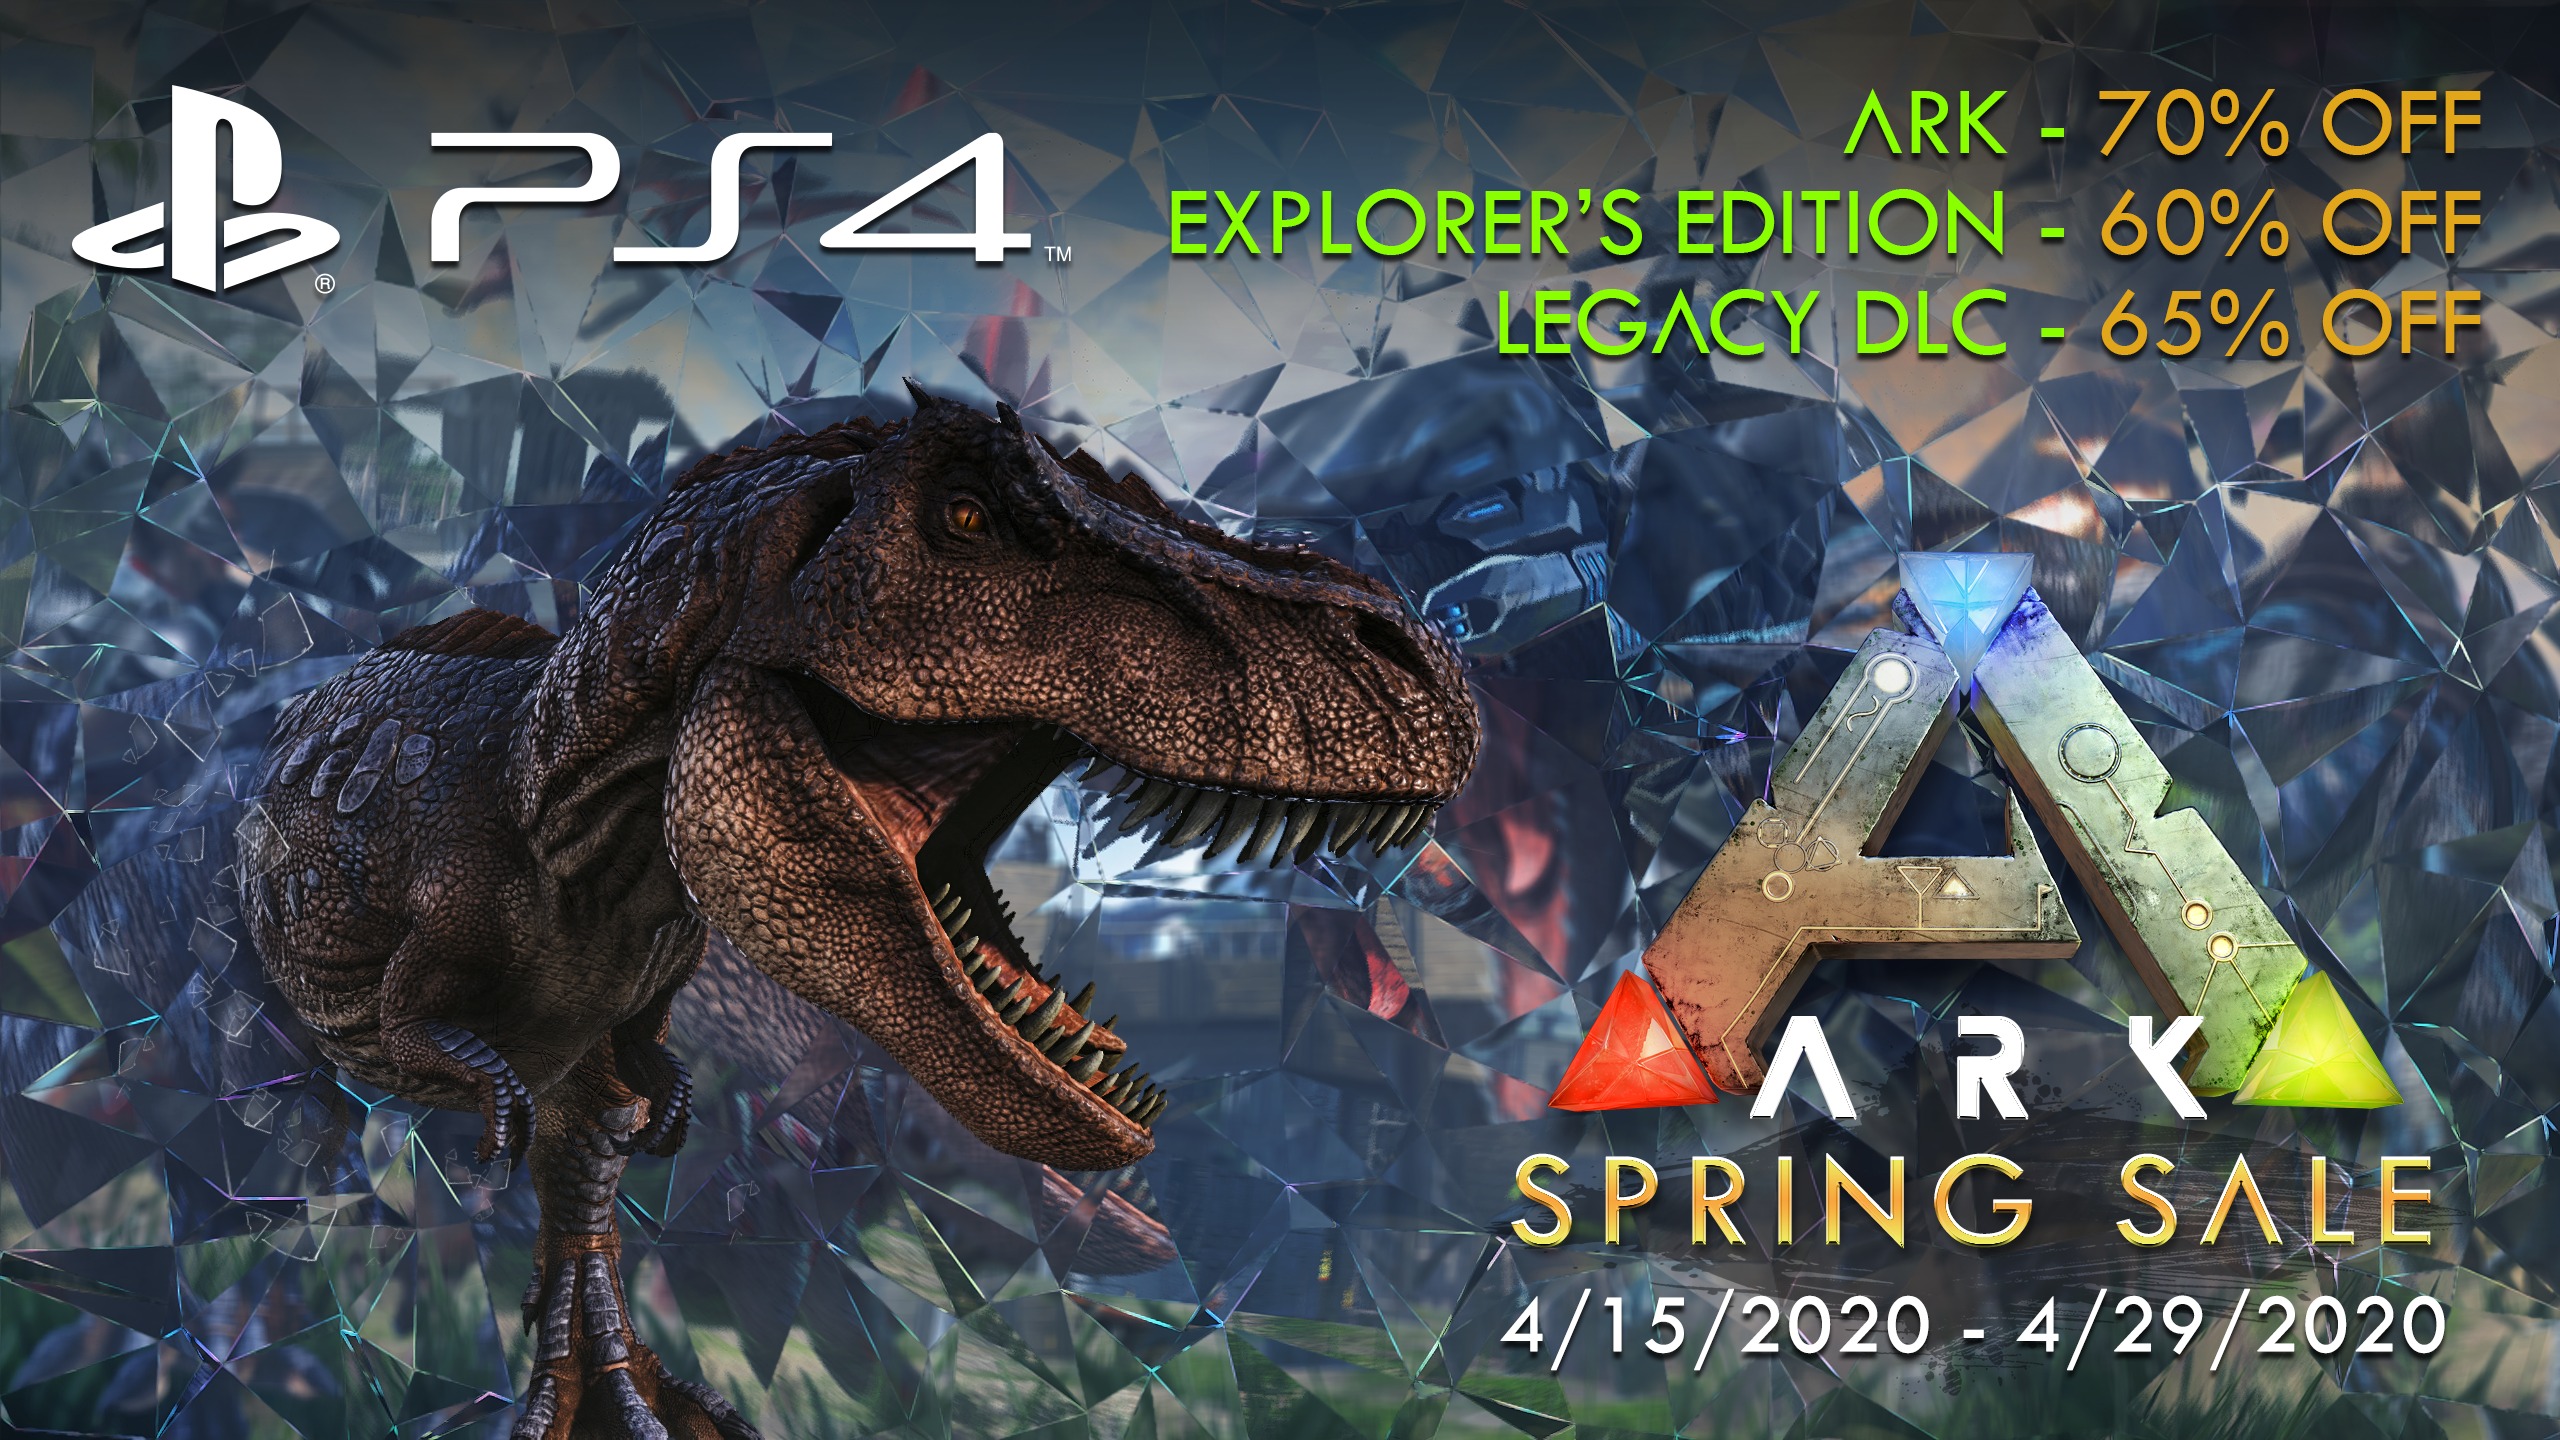 ARK: Survival Evolved on Twitter: "Are you ready to spring into world of ARK? Get while is up to 70% off as part of the Sale on @PlayStation.